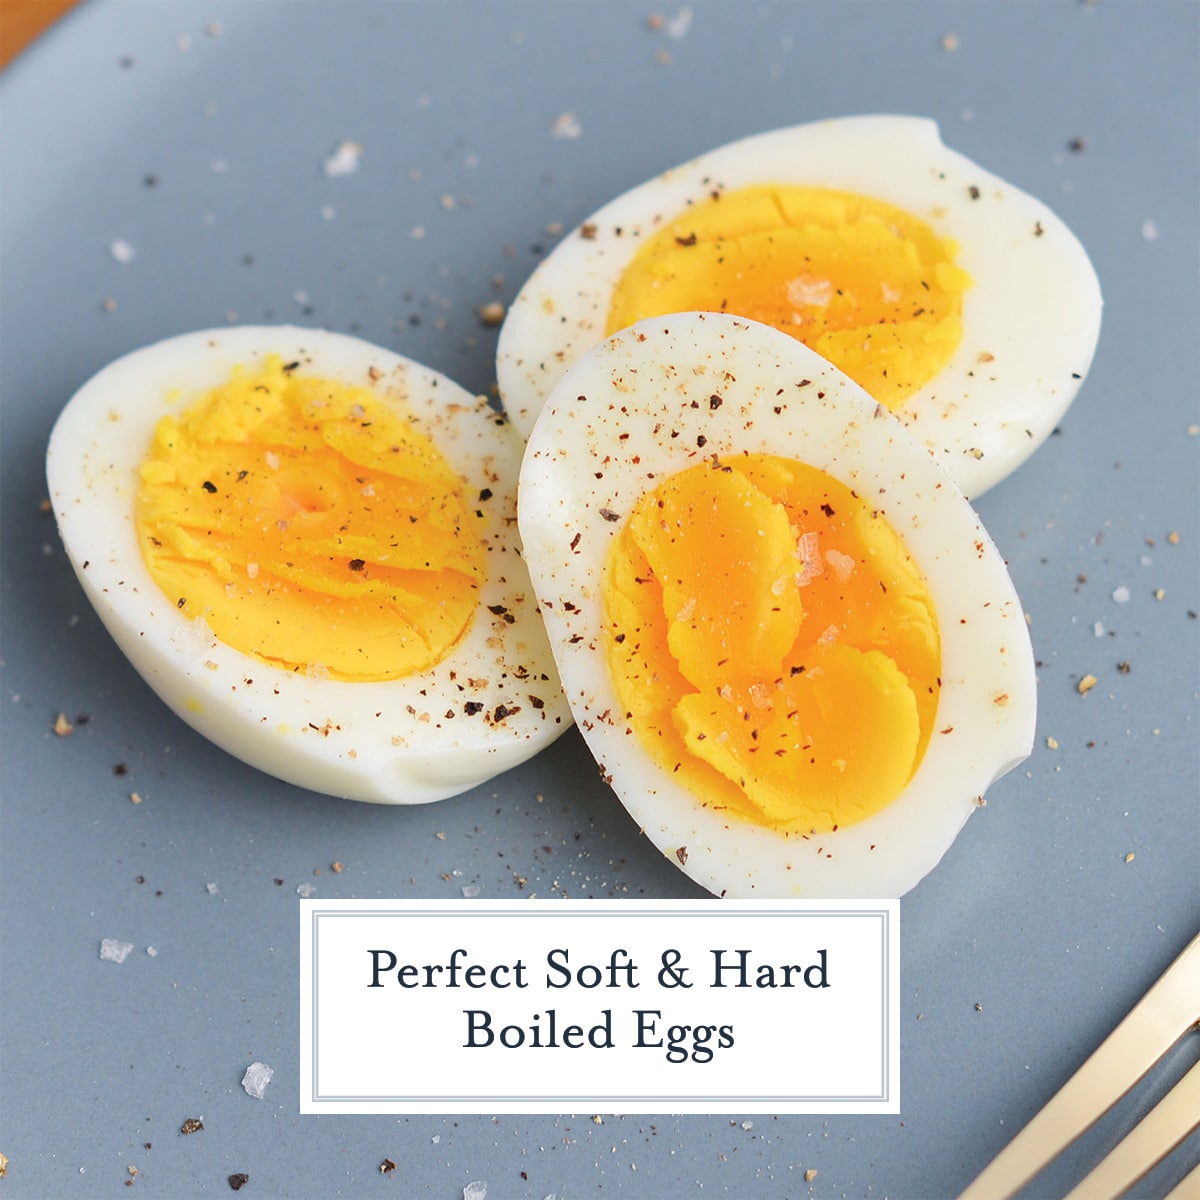 How to Make the Best Hard Boiled Eggs